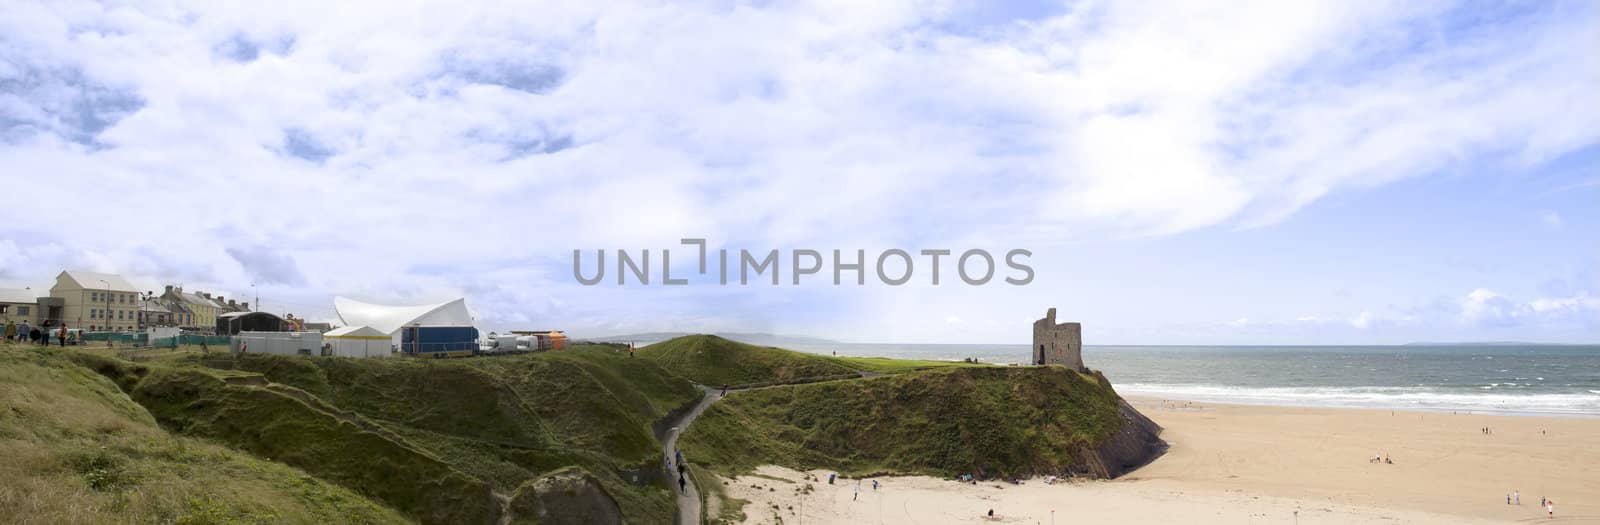 view of ballybunion town and beach by morrbyte